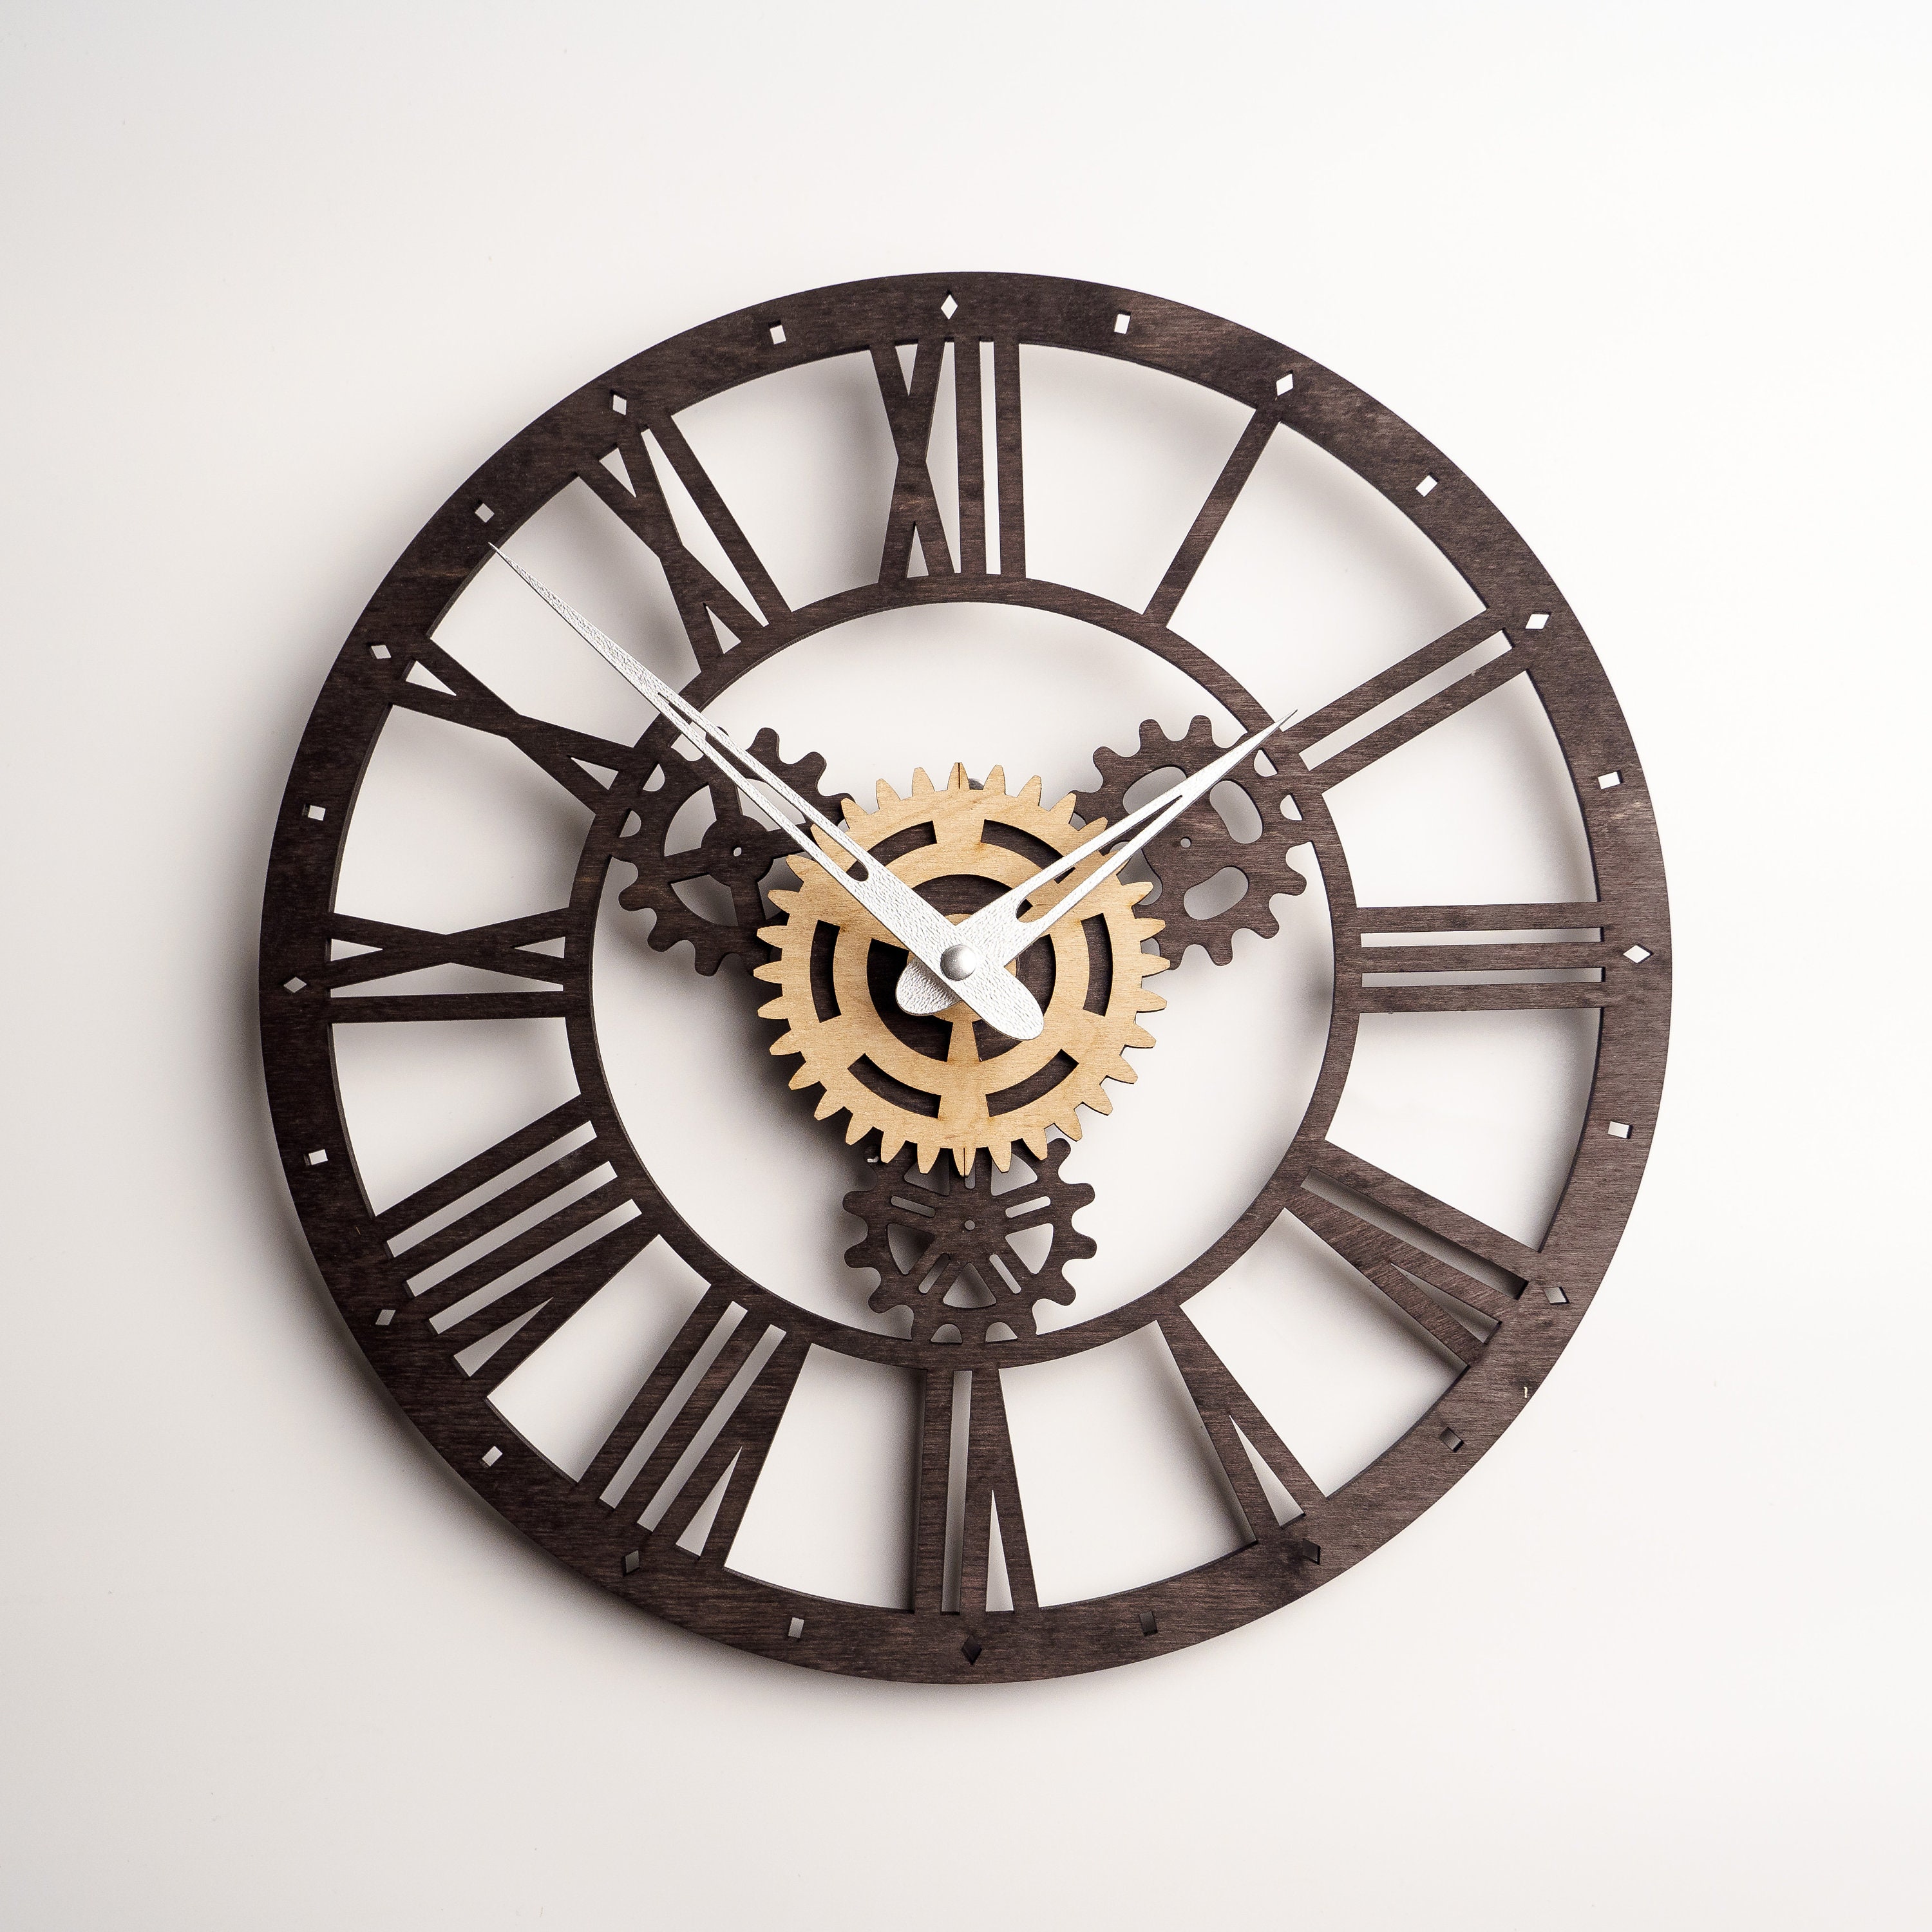 Ascent Clock Plan and Hardware, Wooden Gear Clocks